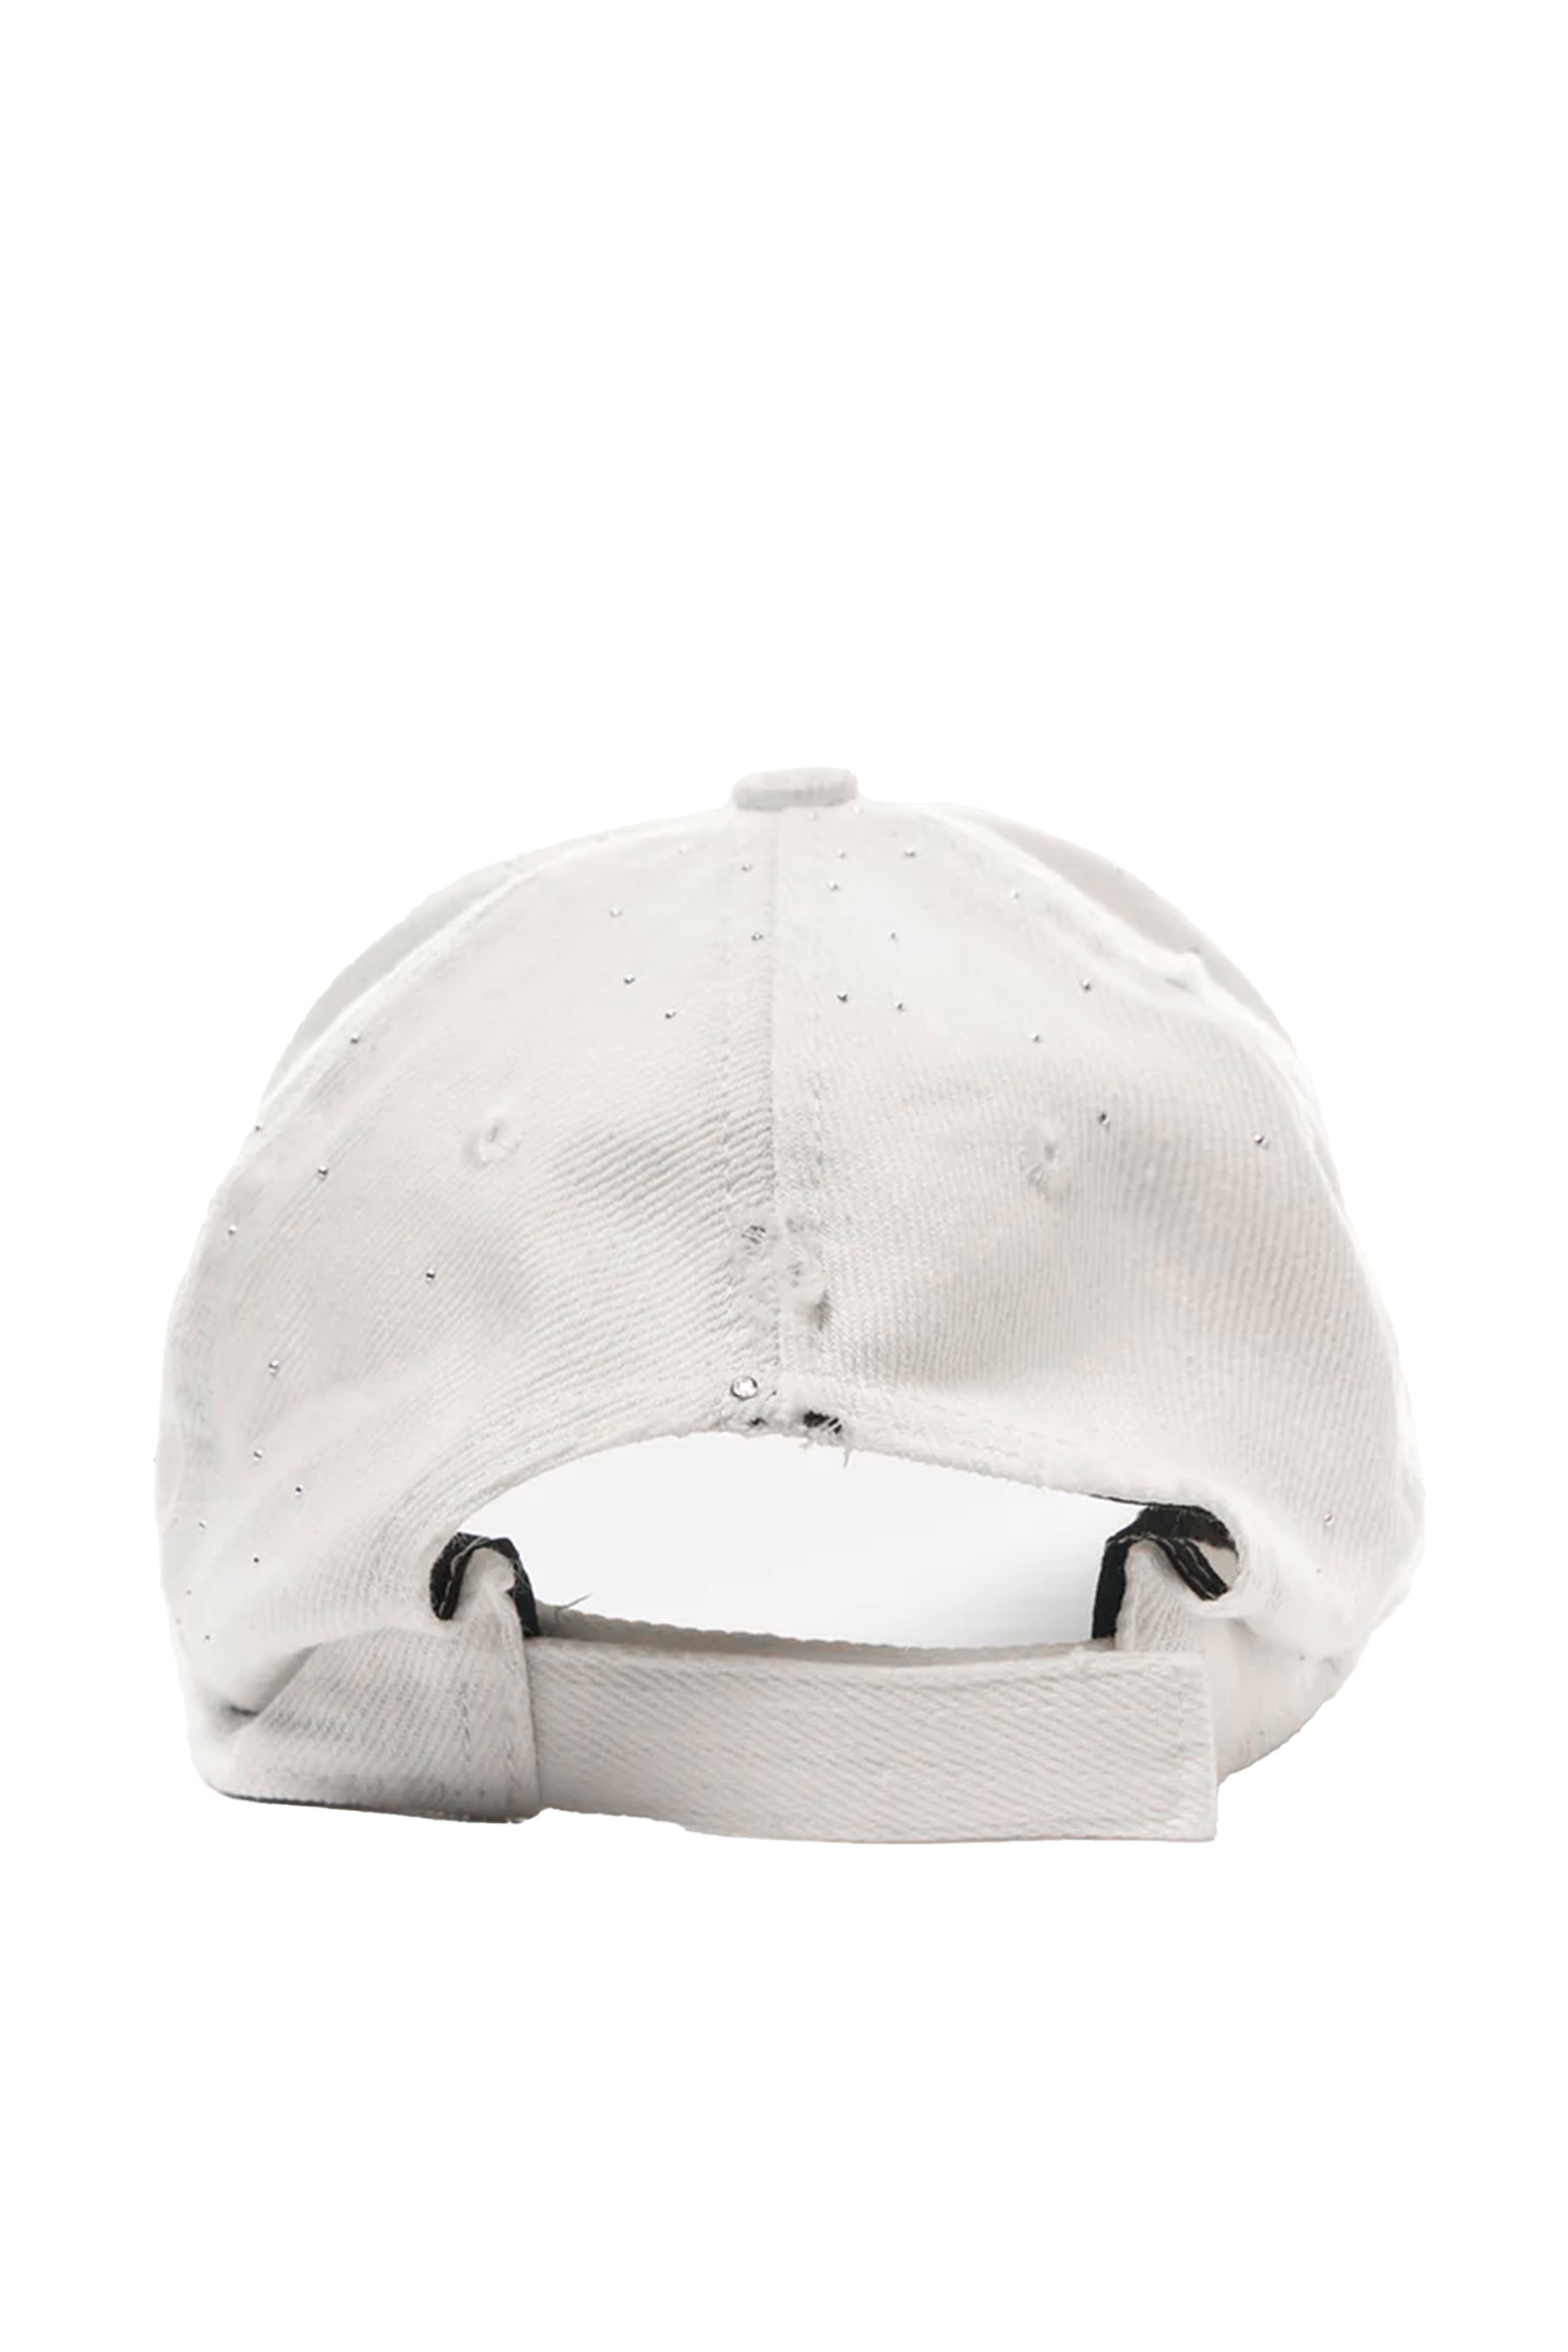 ROLLED BACK CAP / WHT - 2